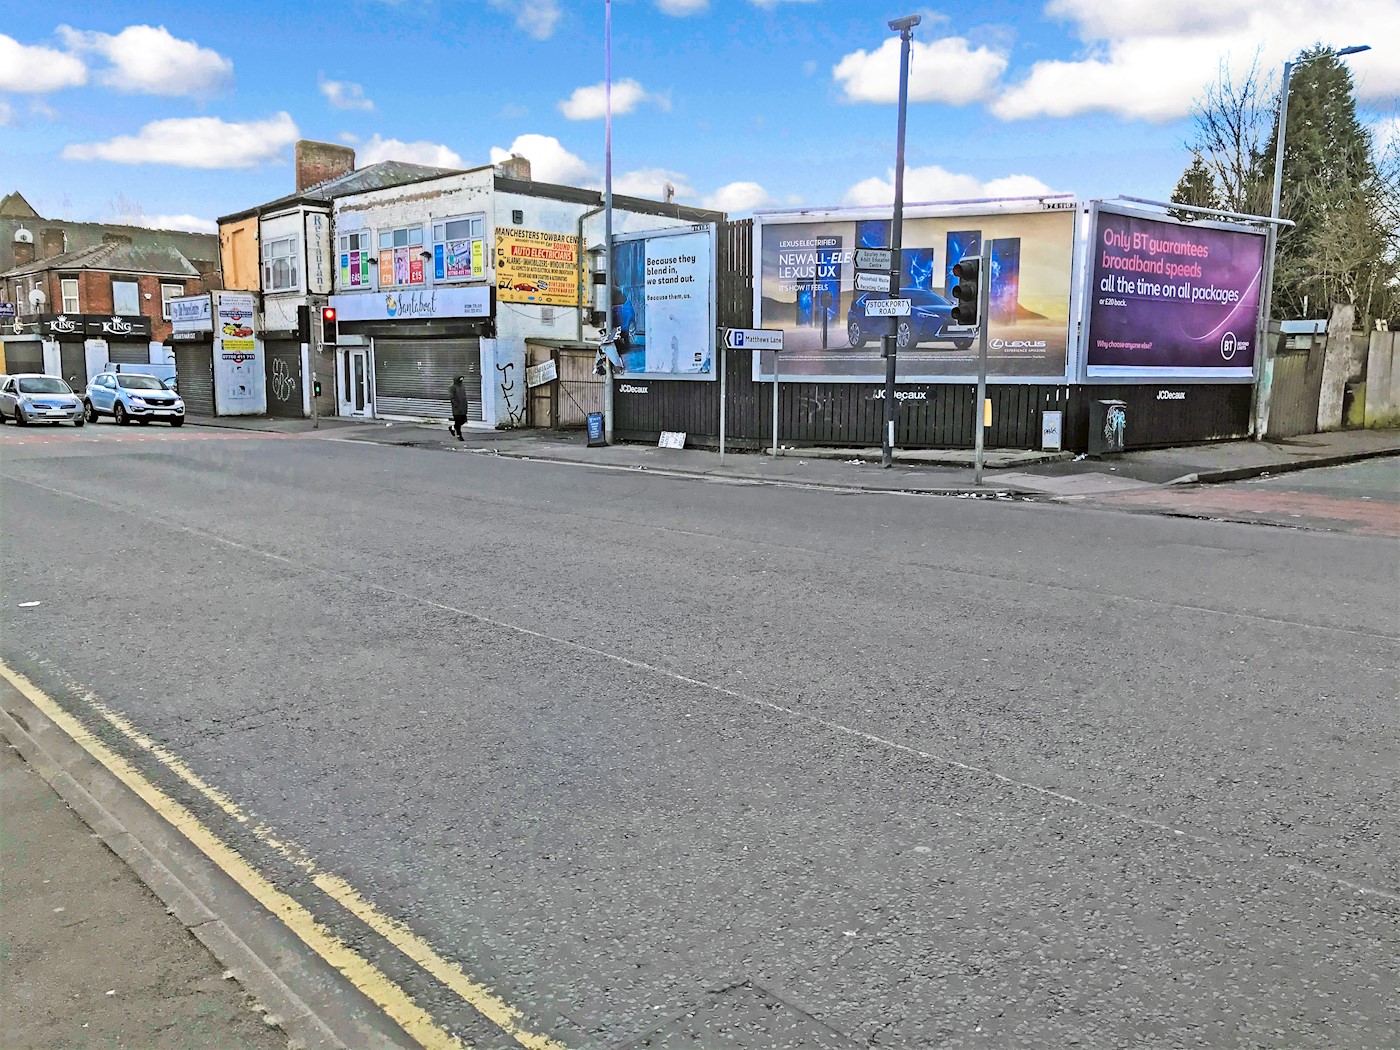 Land at 816 Stockport Road/Midway Street, Manchester, M12 4QN 1/4